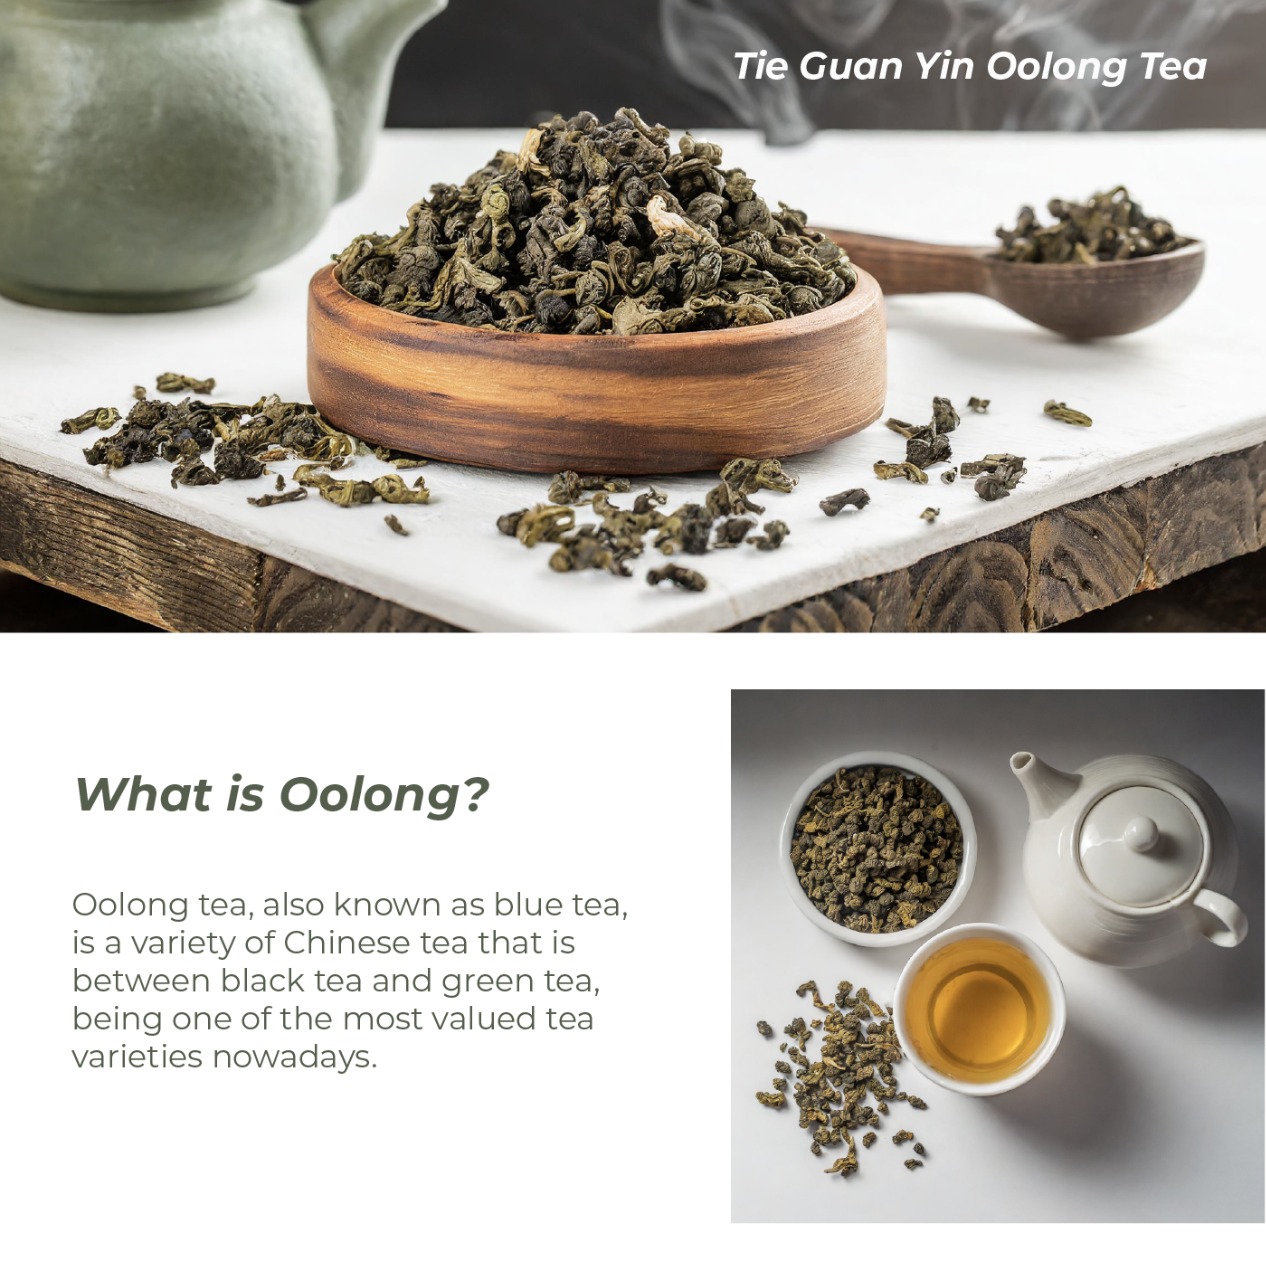 Oolong tea, also known as blue tea, is a variety of Chinese tea that is between black tea and green tea, being one of the most valued tea varieties nowadays.